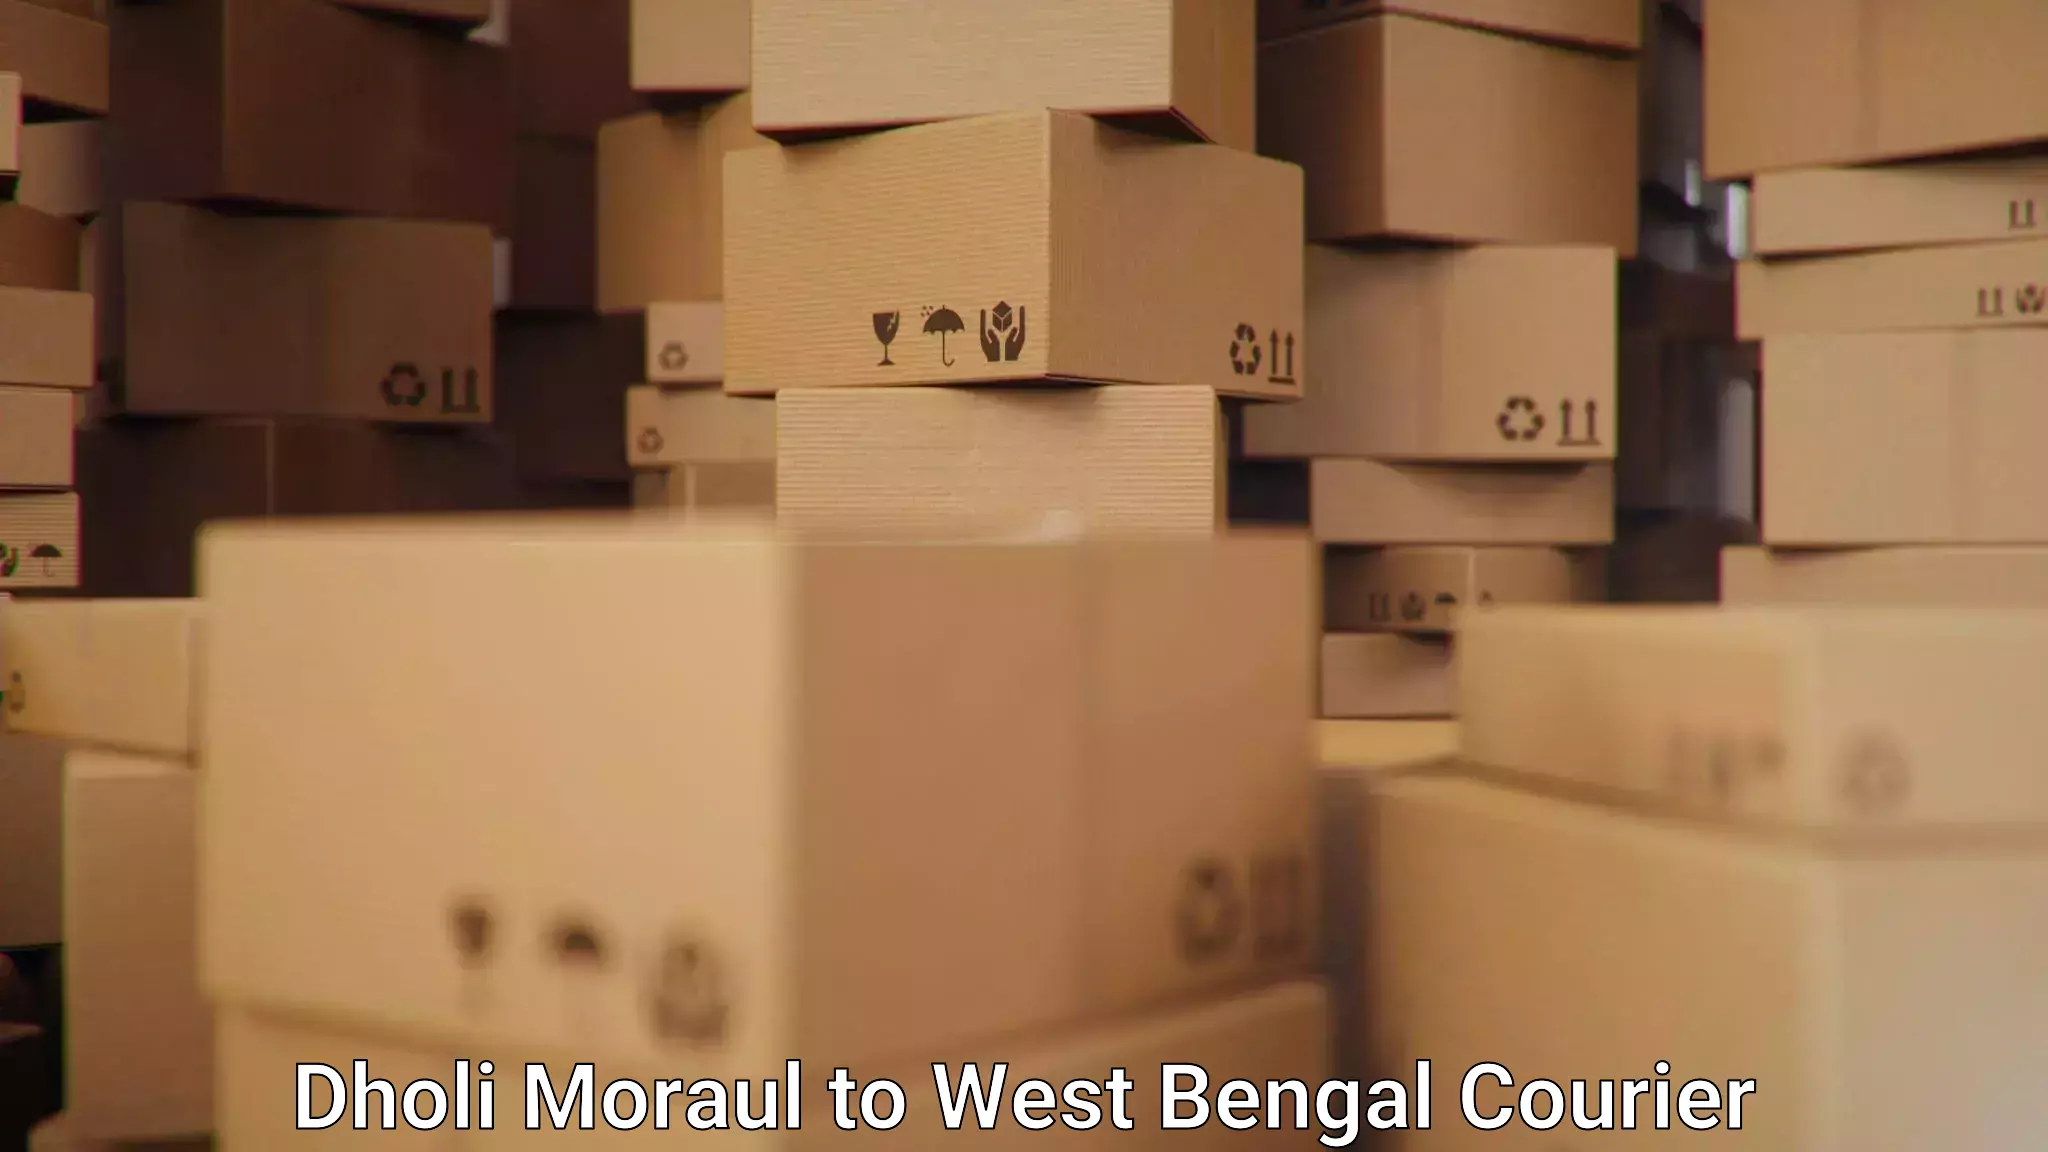 Residential courier service Dholi Moraul to West Bengal